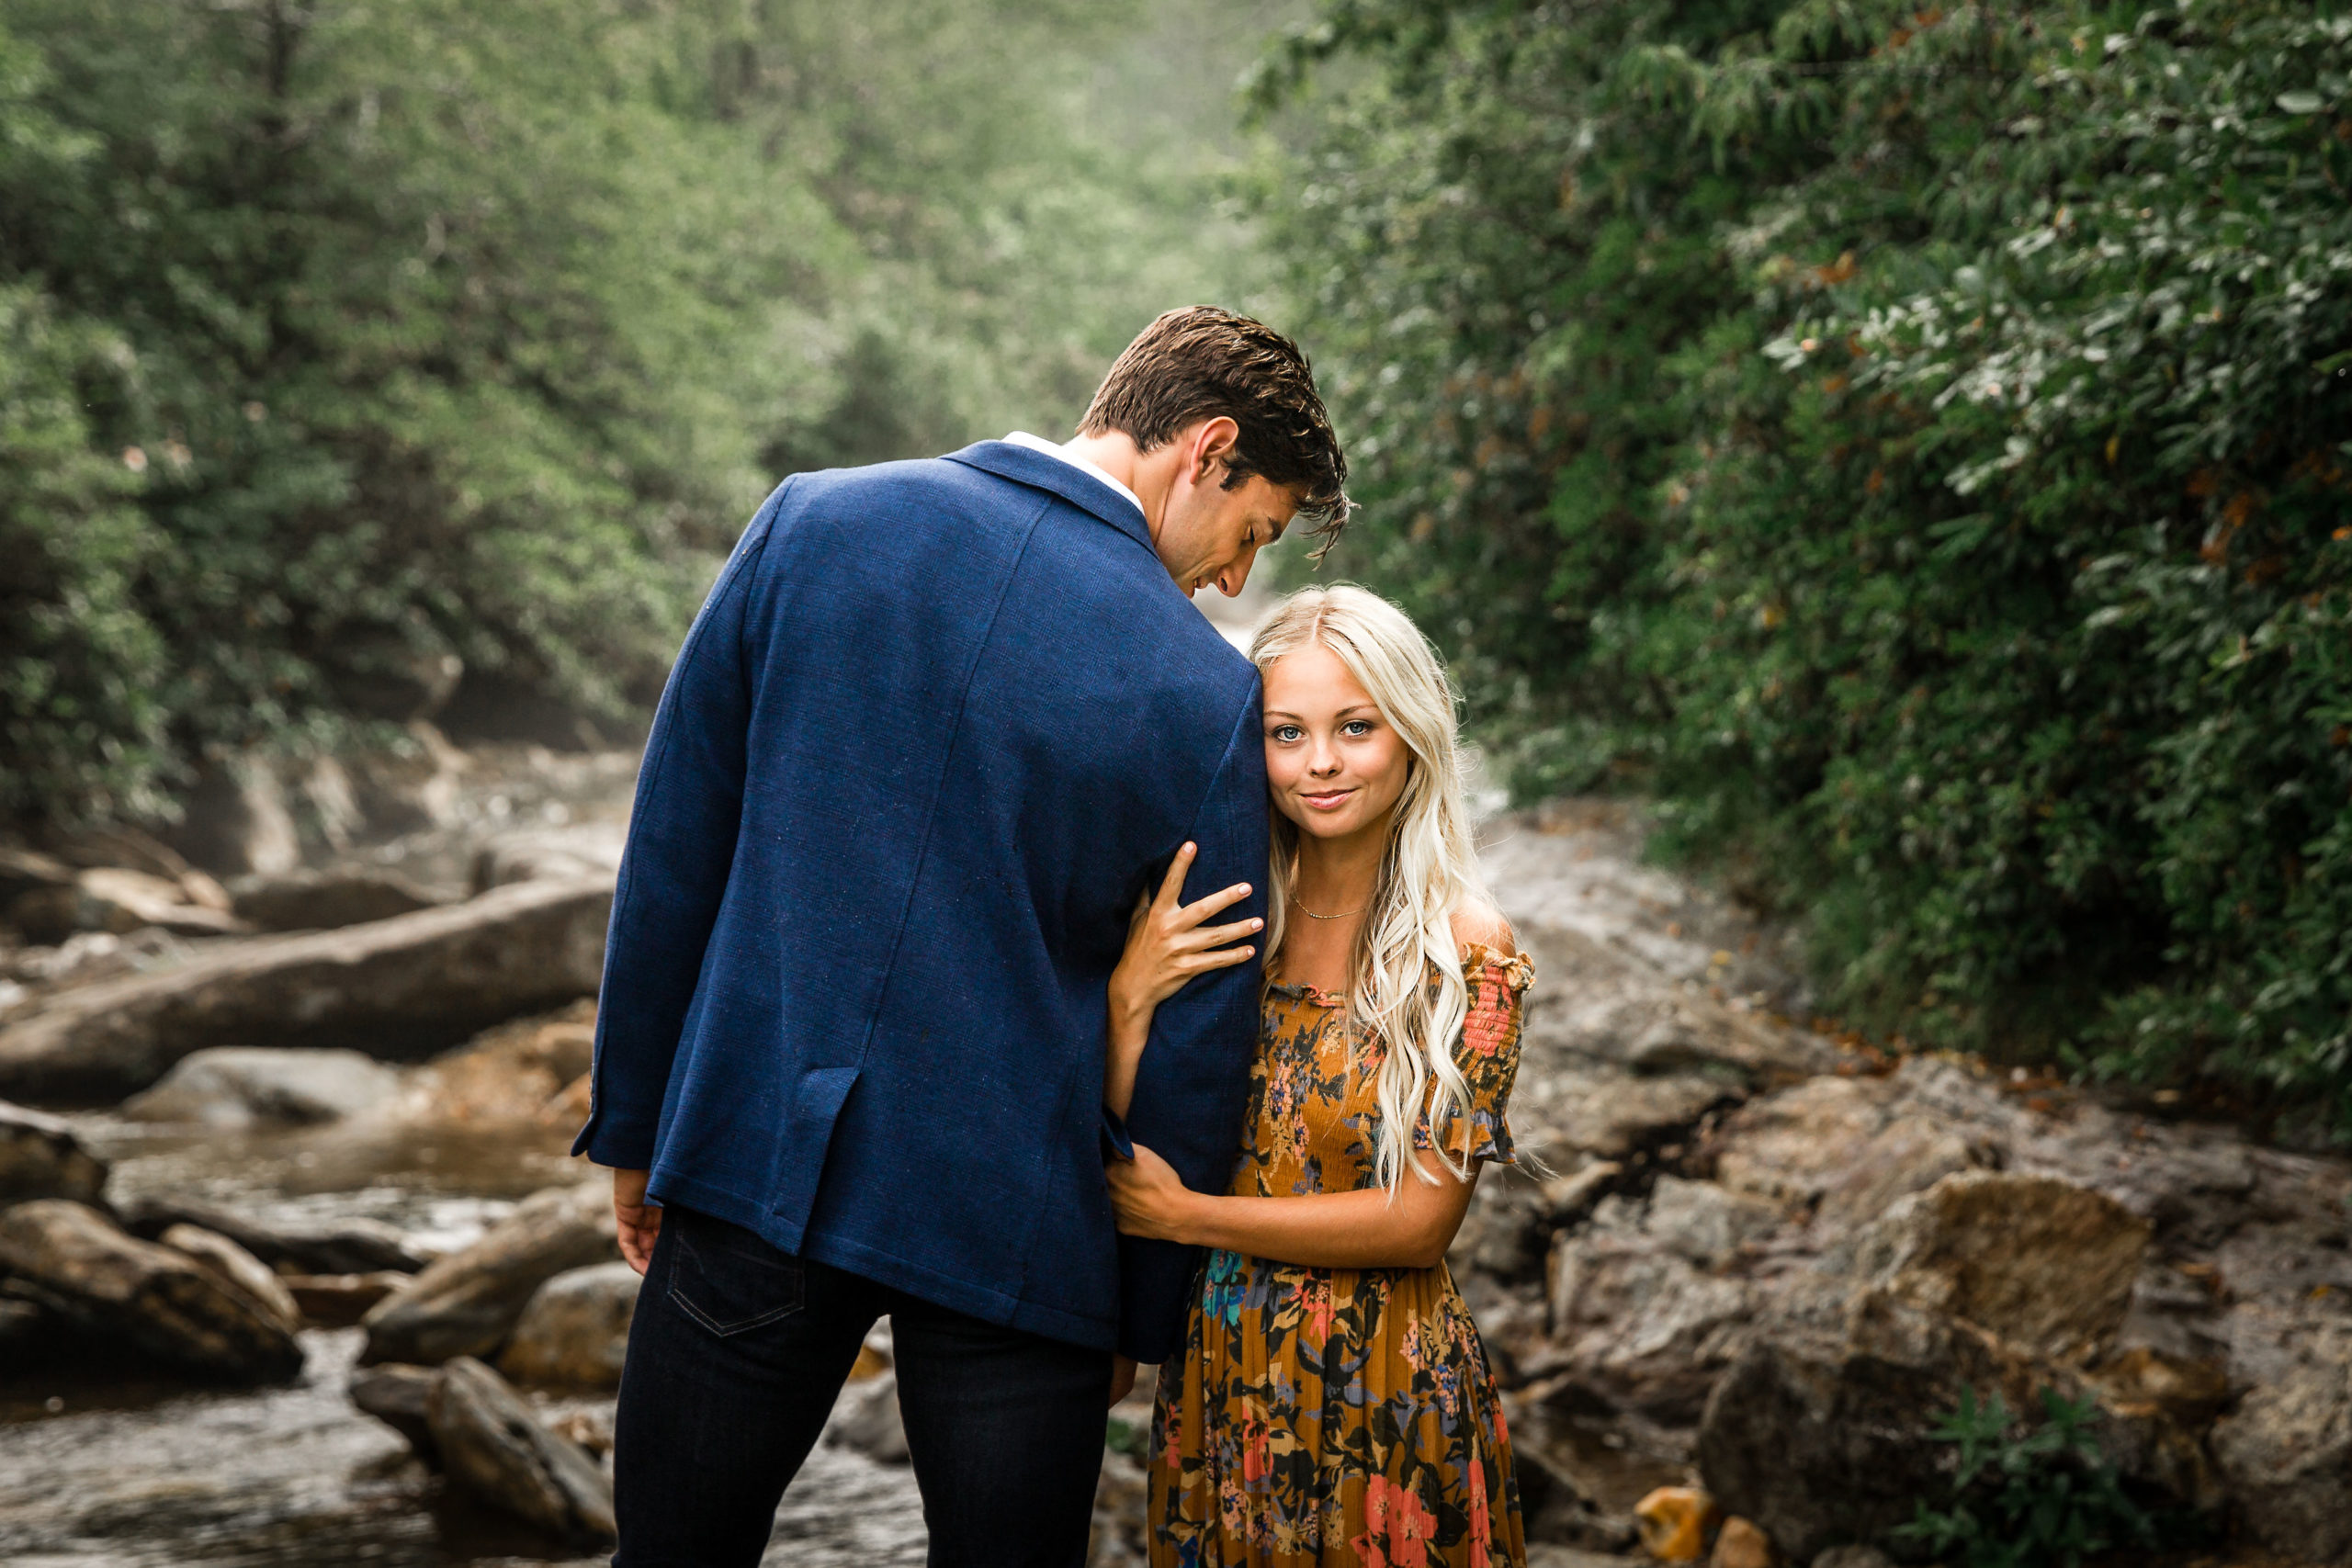 Romantic, colorful mountain engagement session with a couple wearing an orange floral maxi dress and a navy blue blazer with blue jeans.